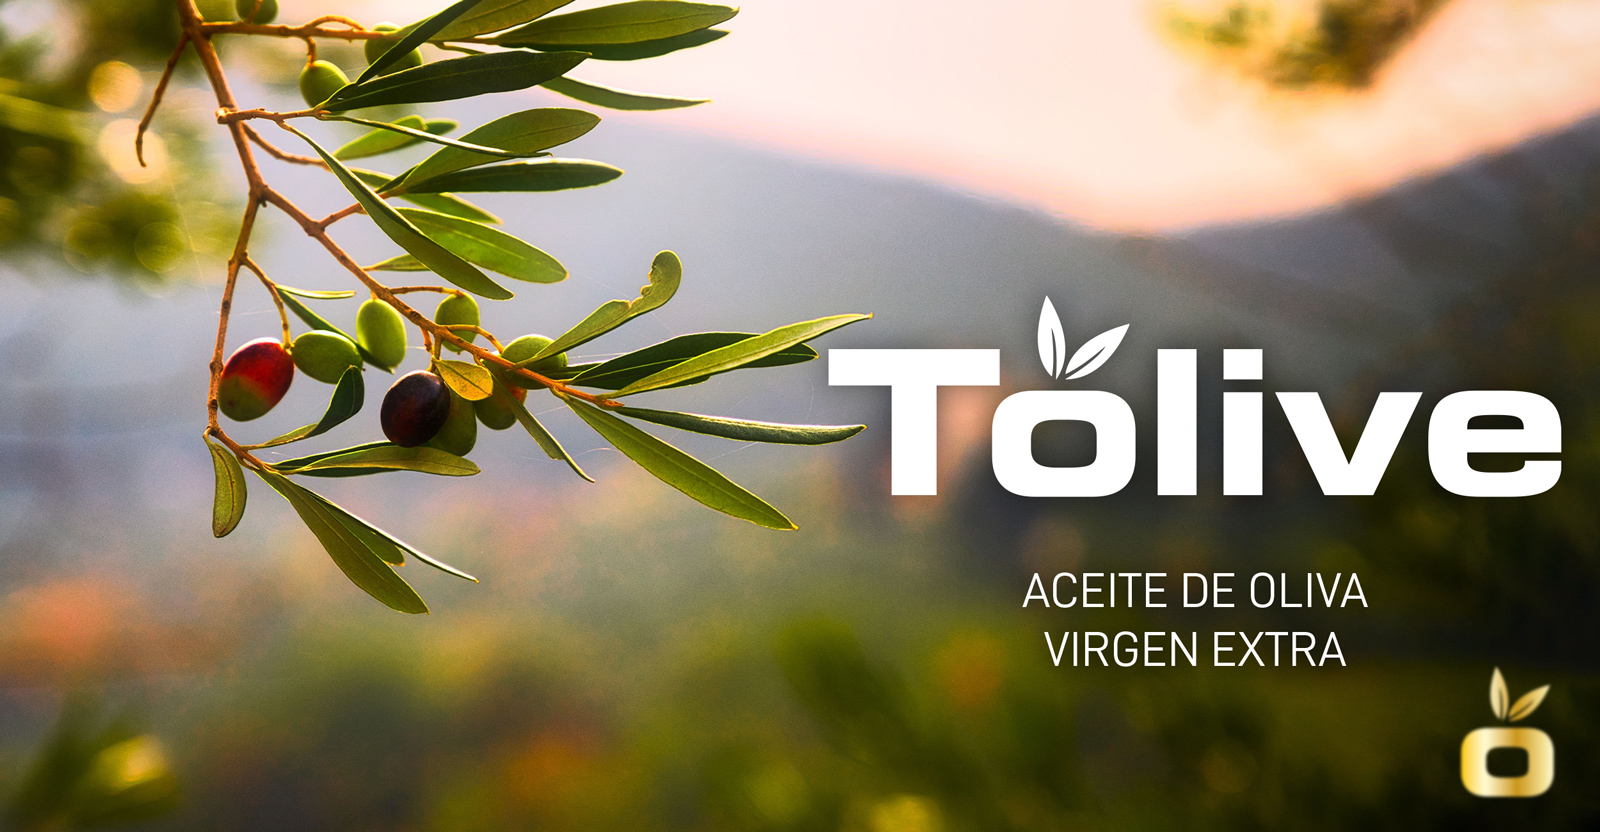 Graphic and creative design of extra virgin olive oil labels for TOLIVE